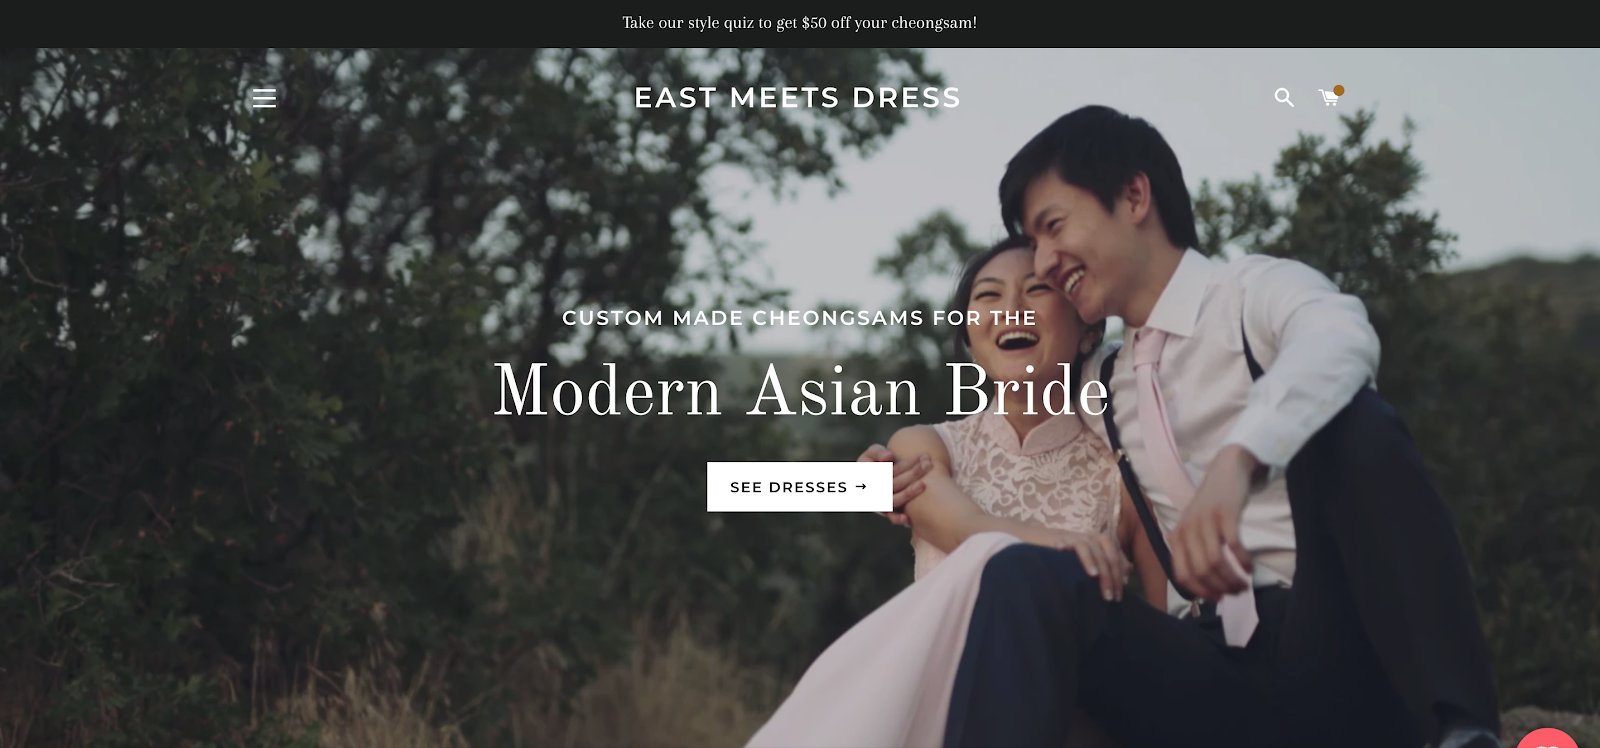 how-i-built-a-six-figure-business-bringing-asian-culture-to-the-american-wedding-industry